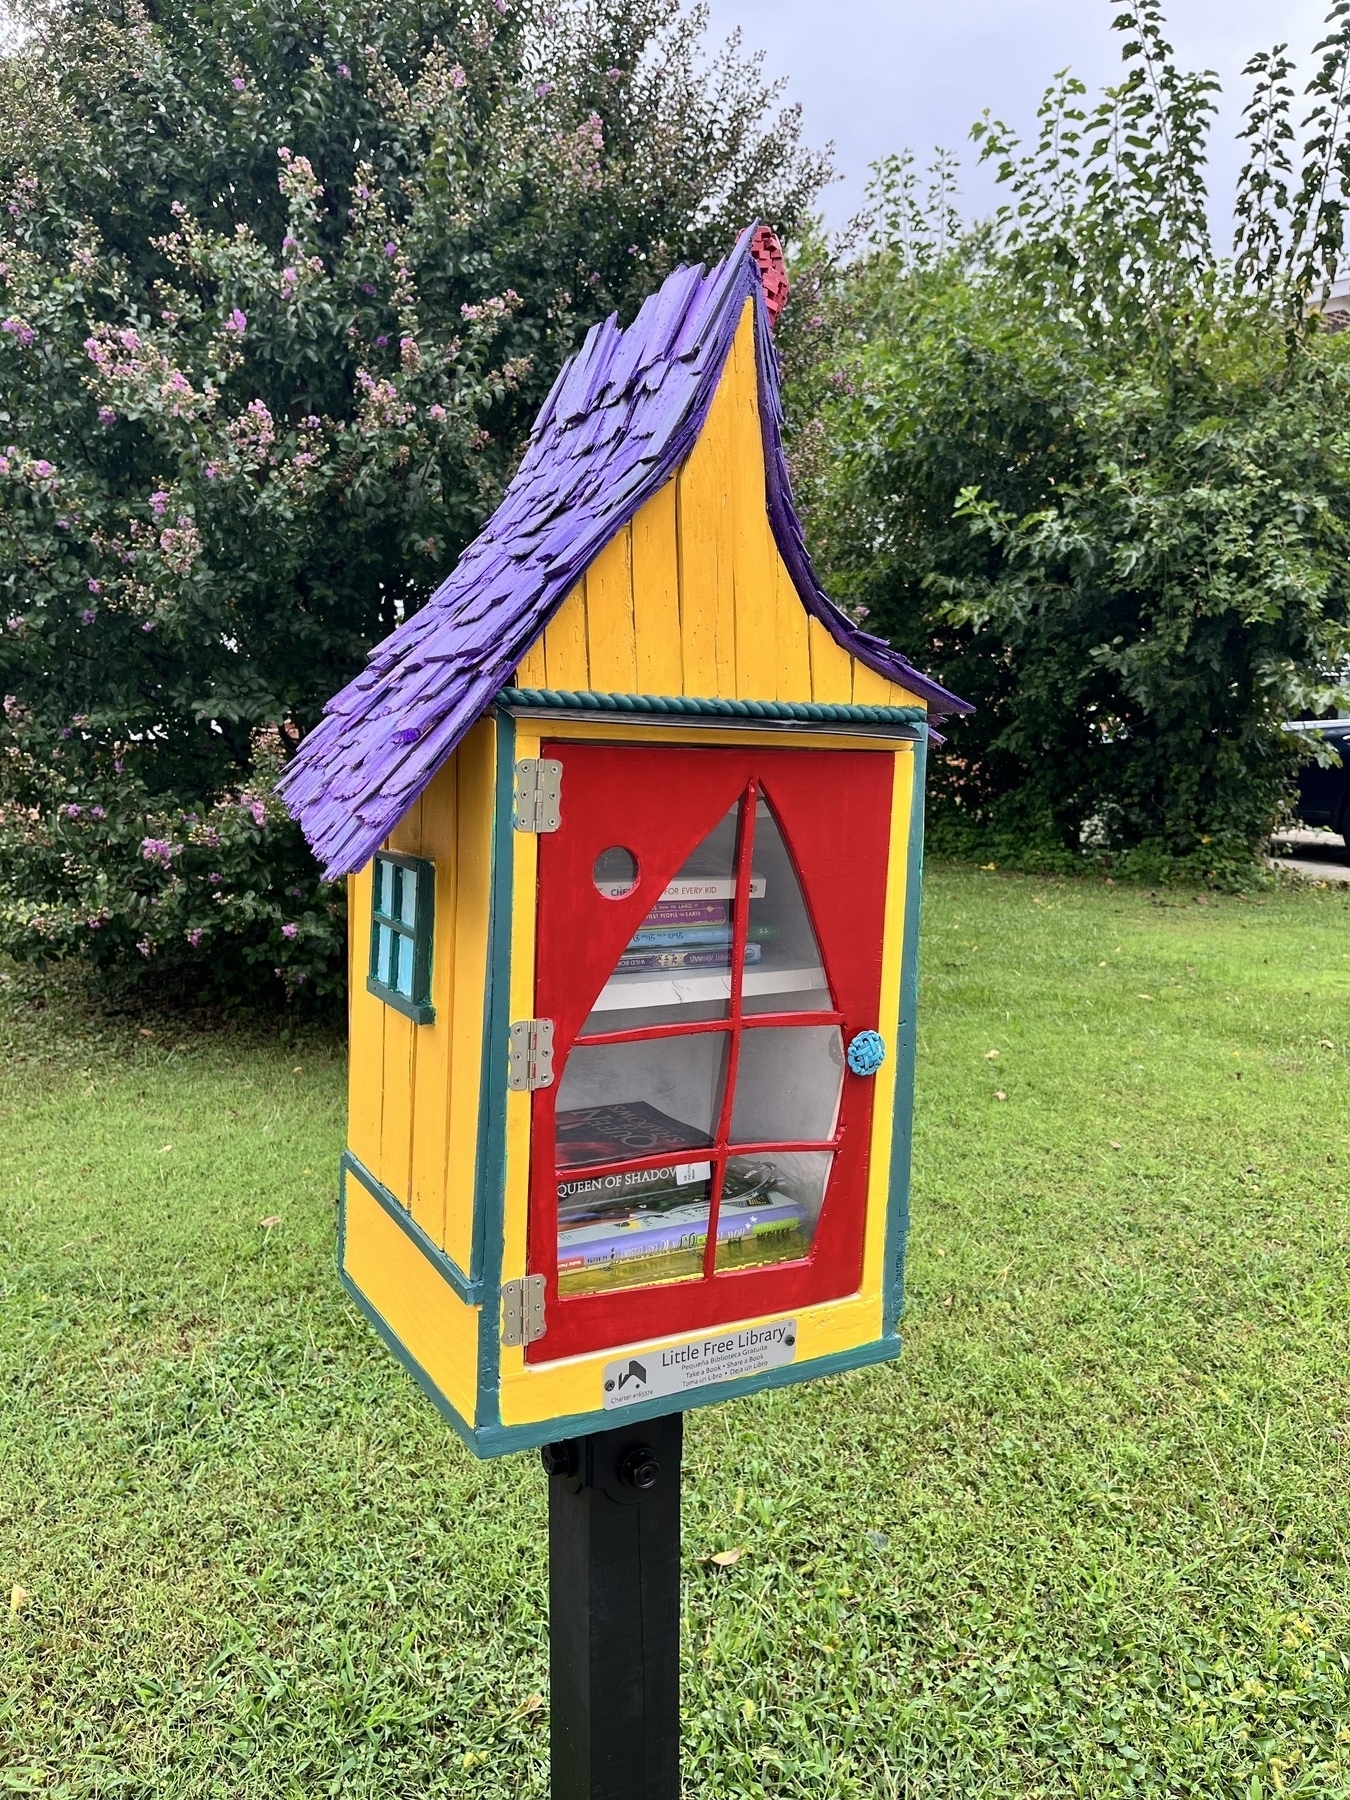 Little Free Library painted yellow with a purple shingle roof.  